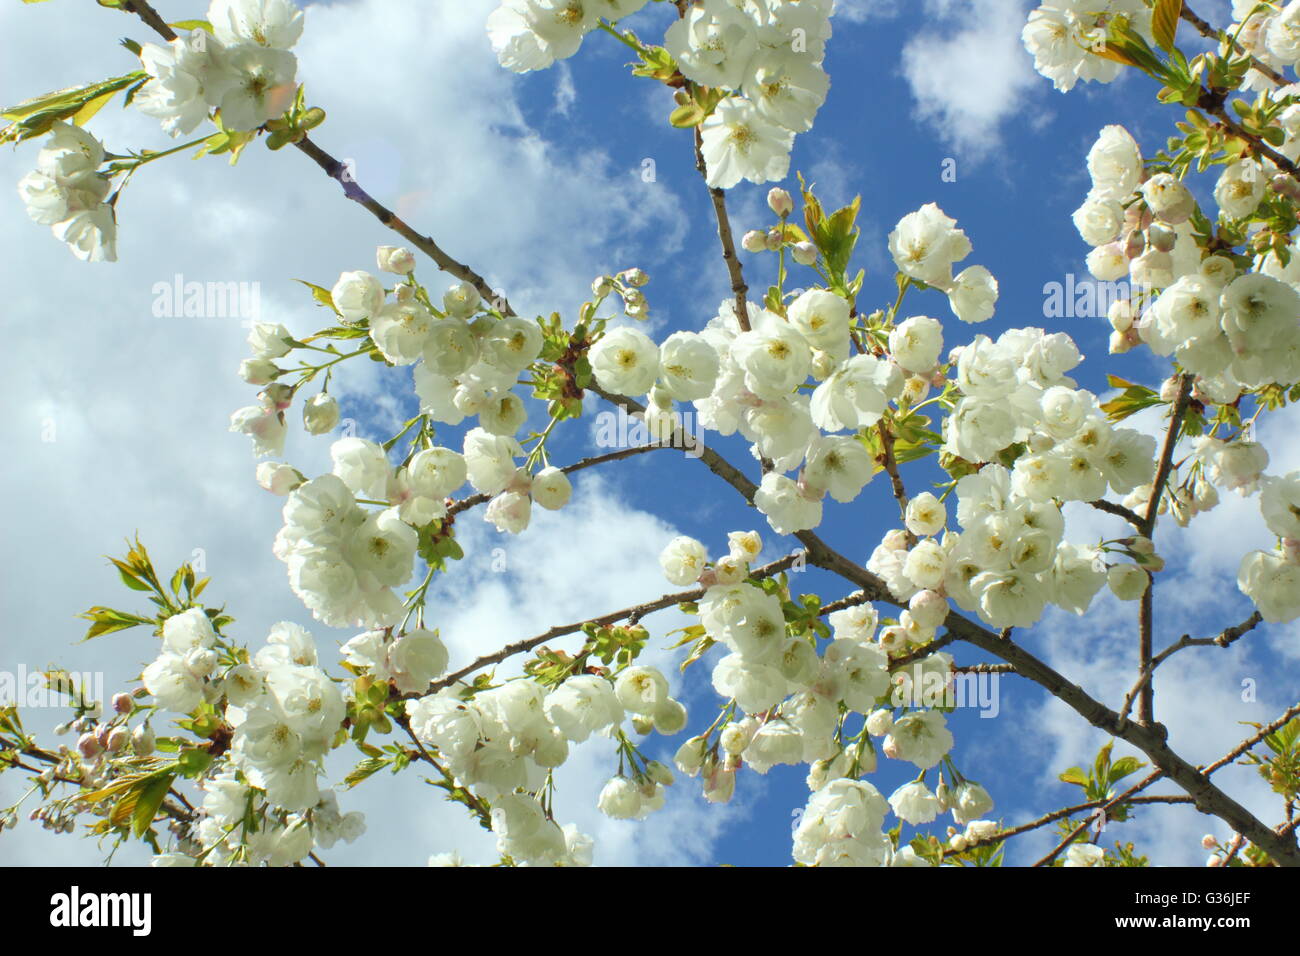 The blossoming flowers of a great white cherry tree (prunus tai haku) on a sunny, spring day in the East Midlands of England UK Stock Photo